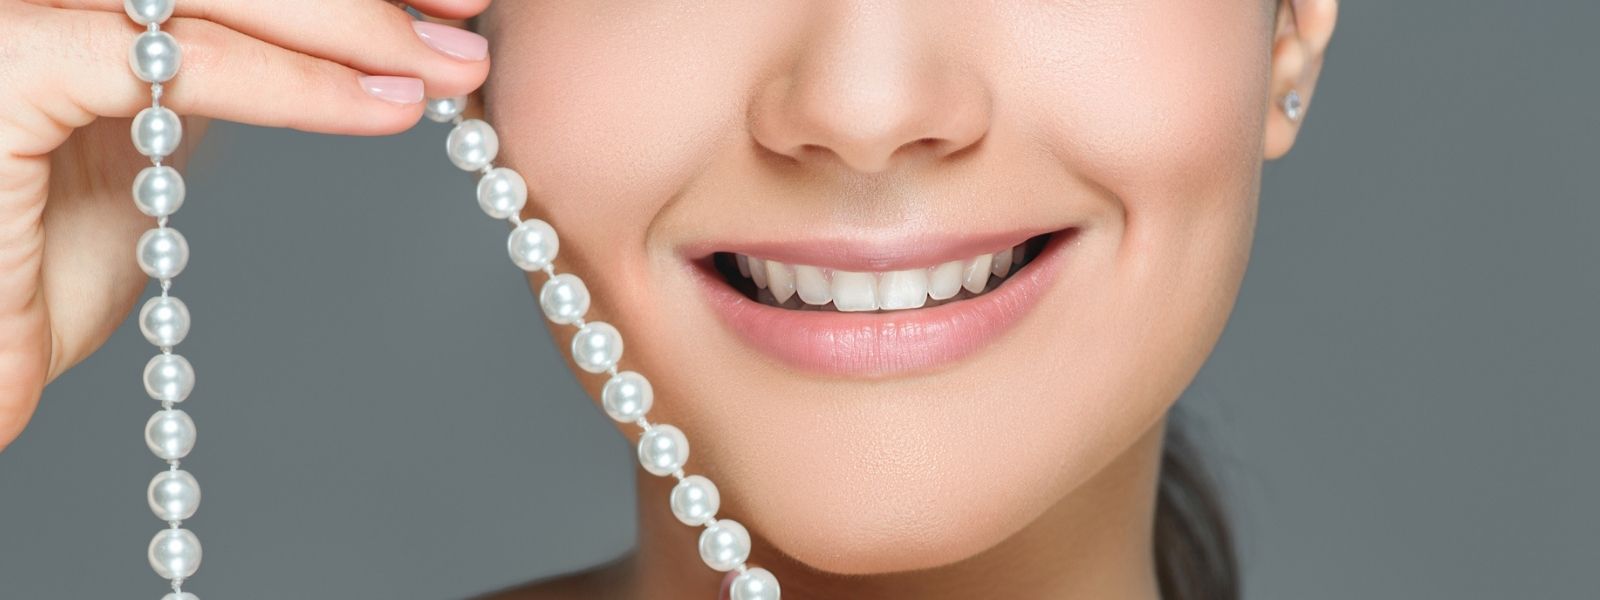 smiling girl with pearls string